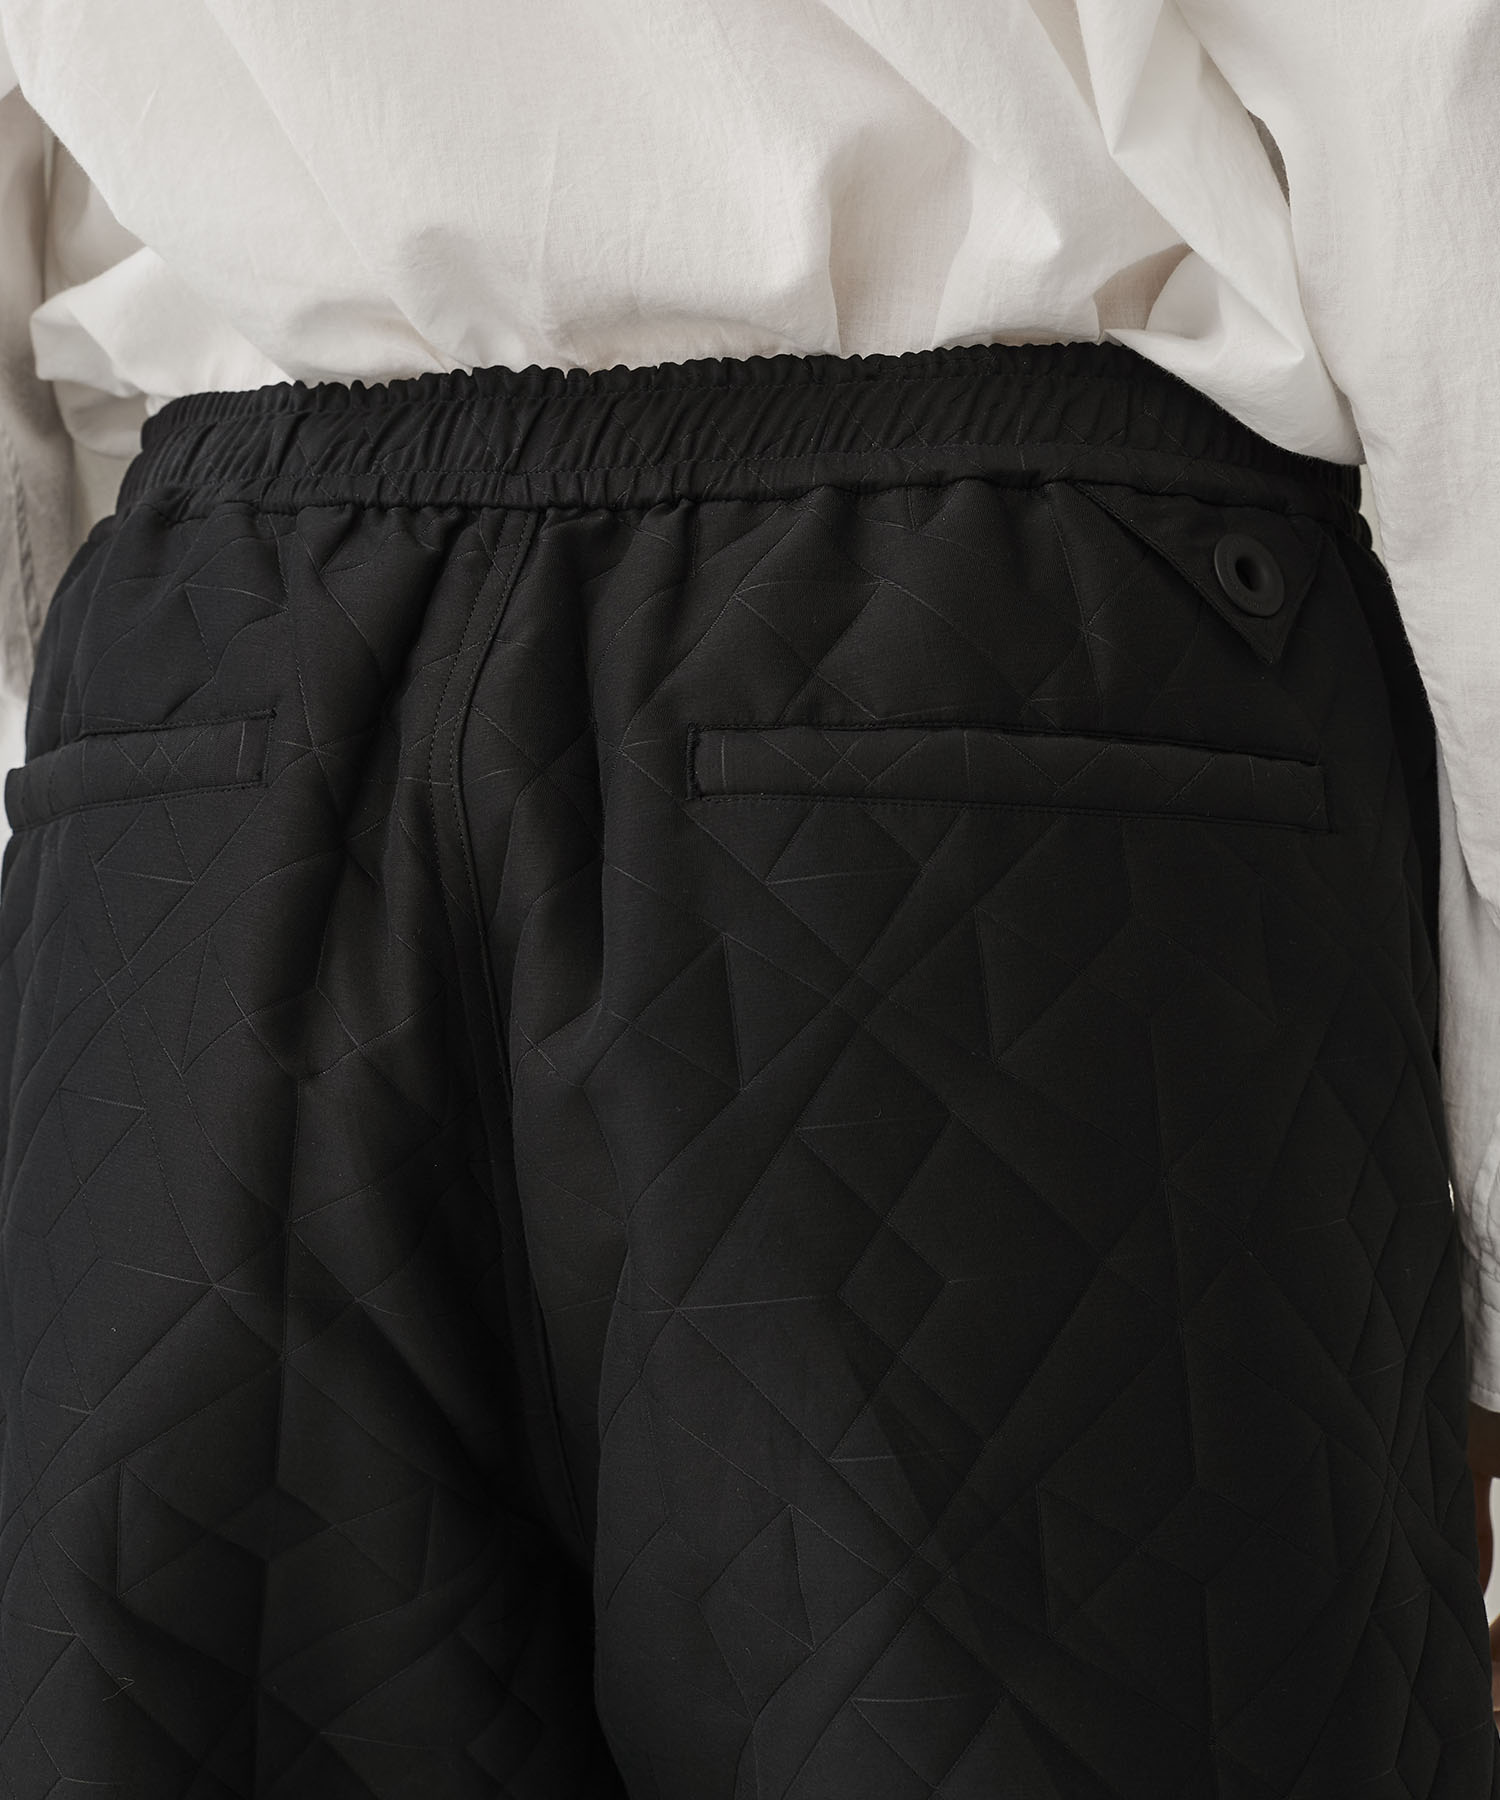 PARQUEST JACQUARD EASY SHORT PANTS White Mountaineering